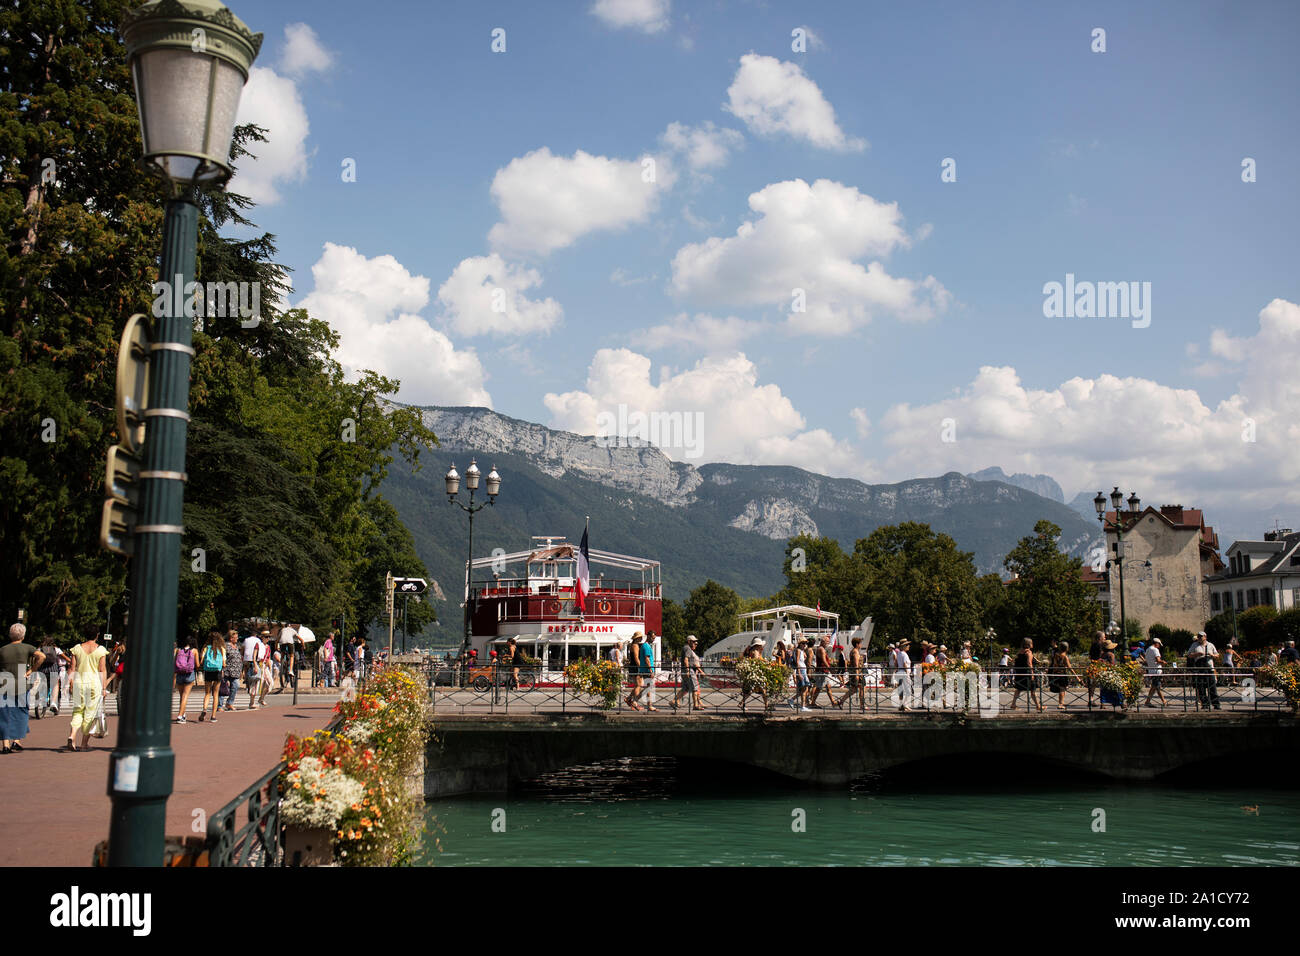 The Bateau Restaurant Le Libellule is visible behind the bridge at Quai Eustache Chappuis over Le Thiou canal in the old town of Annecy, France. Stock Photo